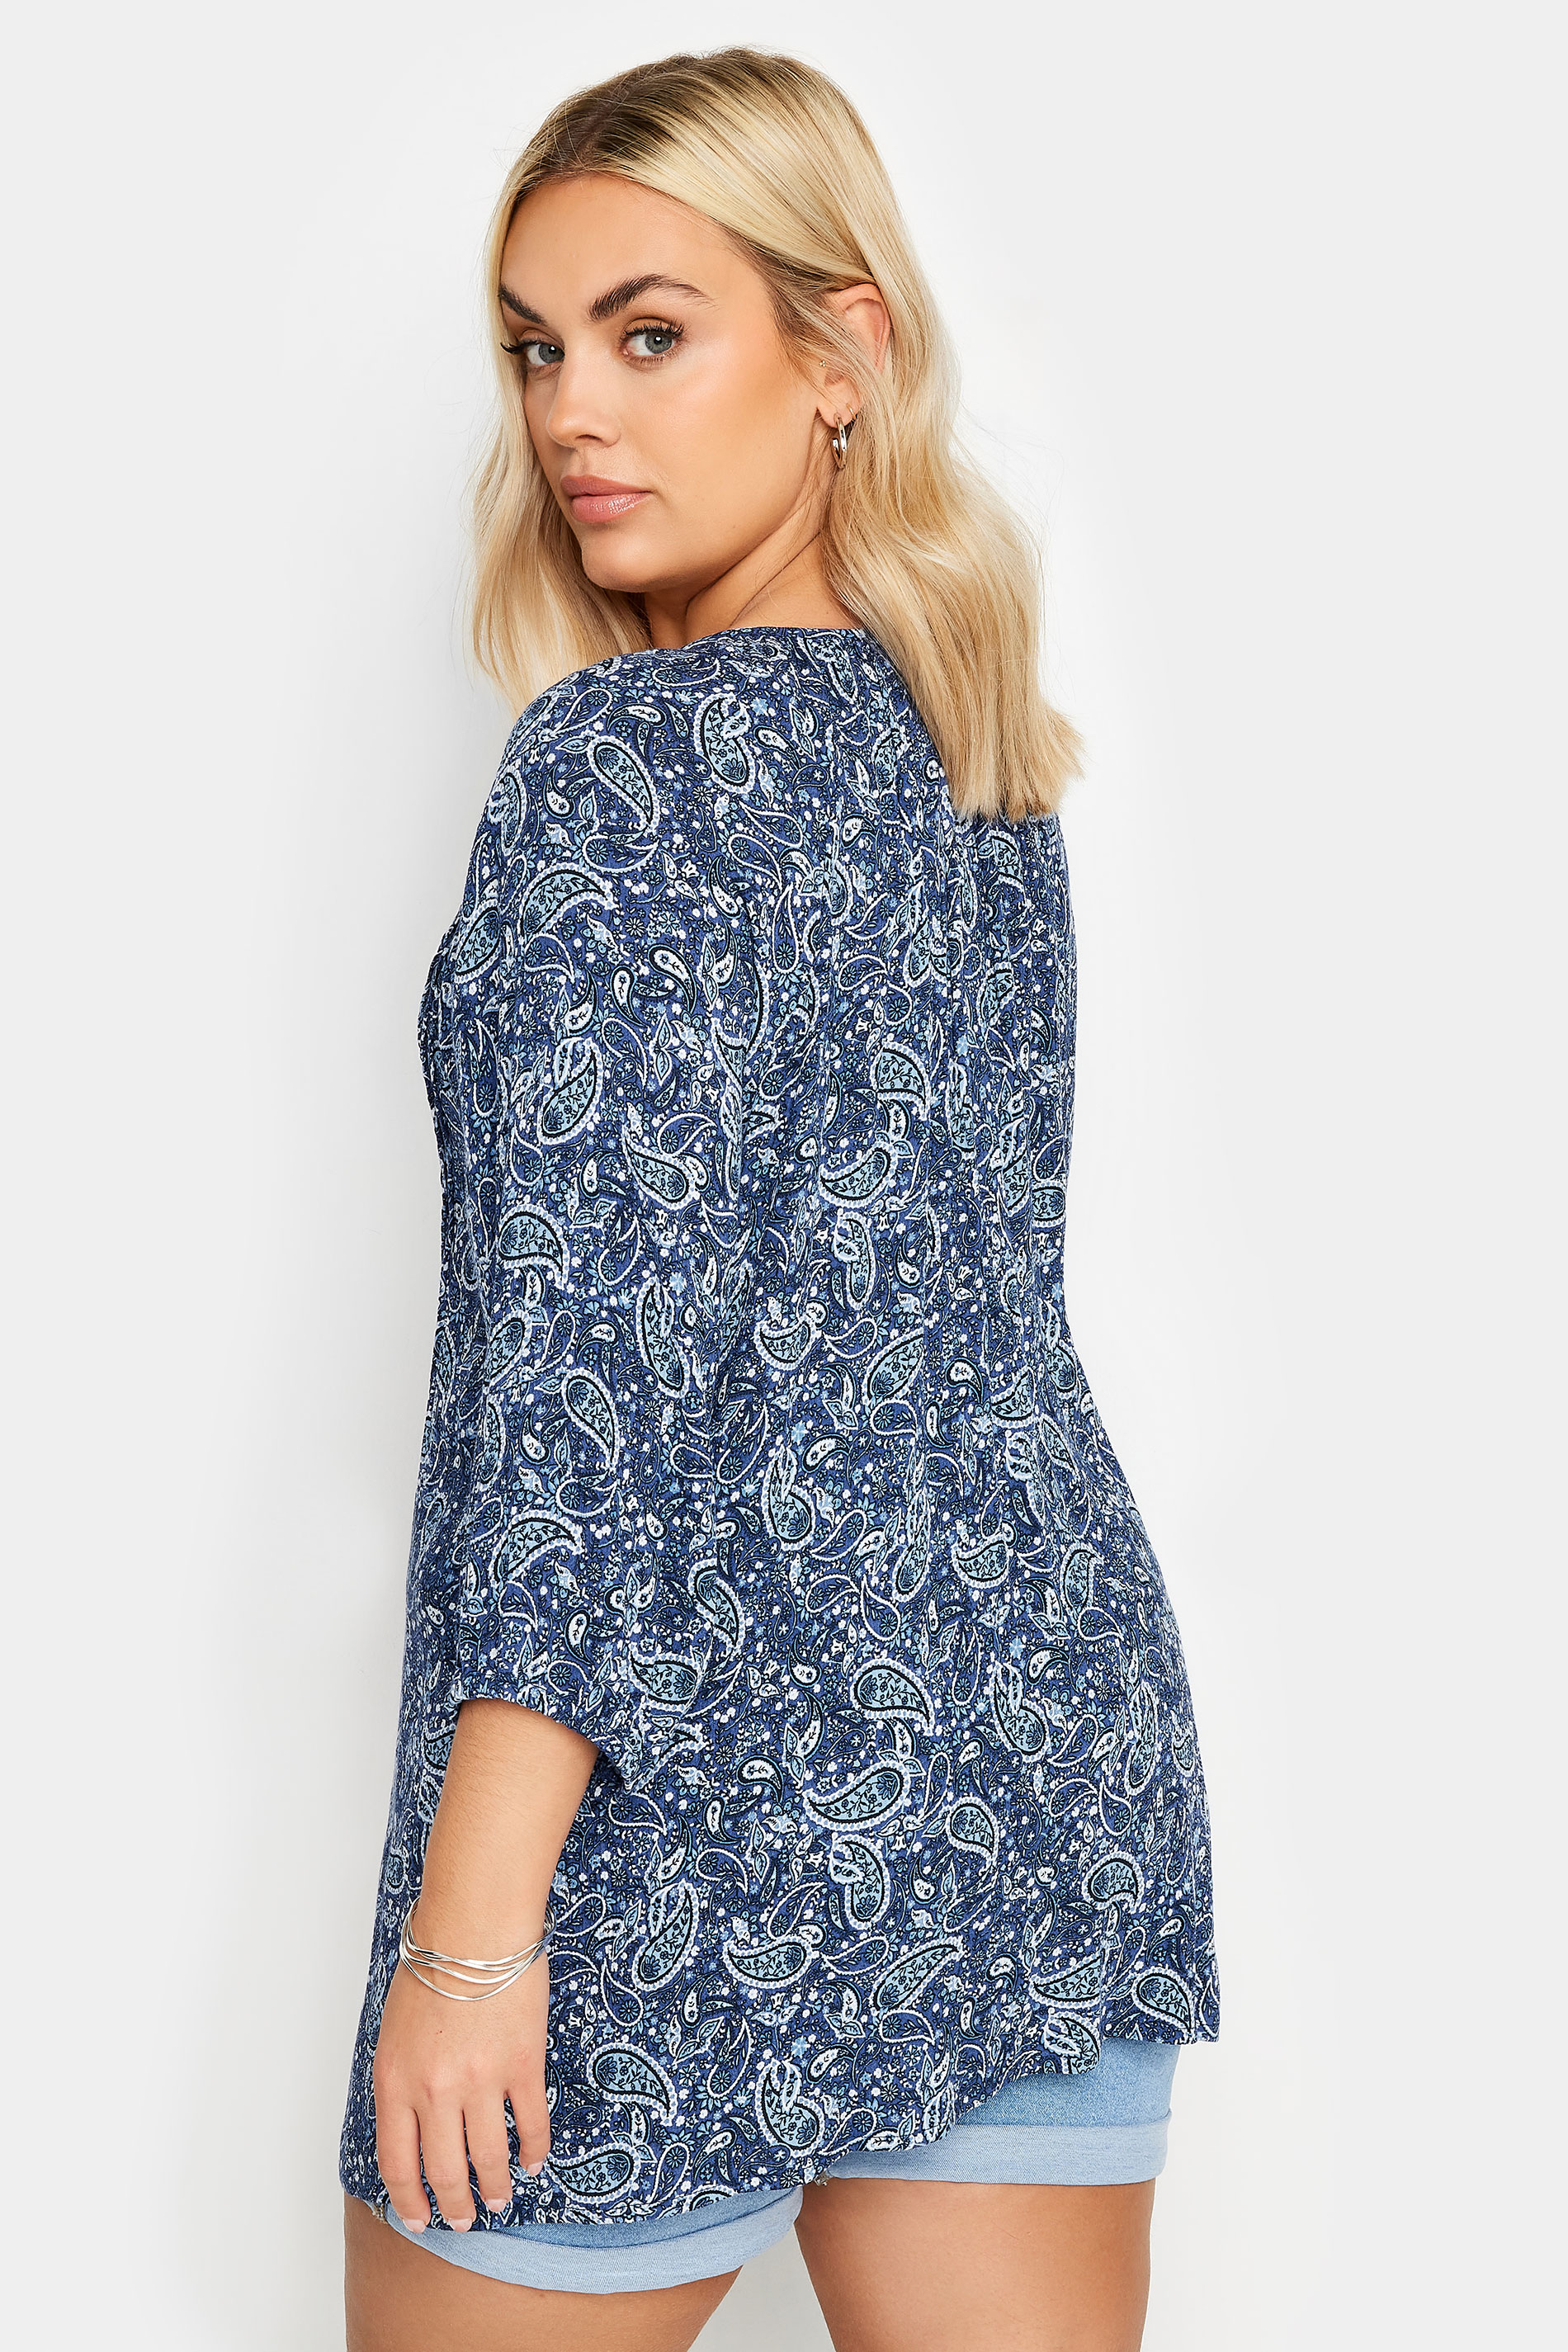 YOURS Plus Size Navy Blue Paisley Print Tie Neck Blouse | Yours Clothing 3